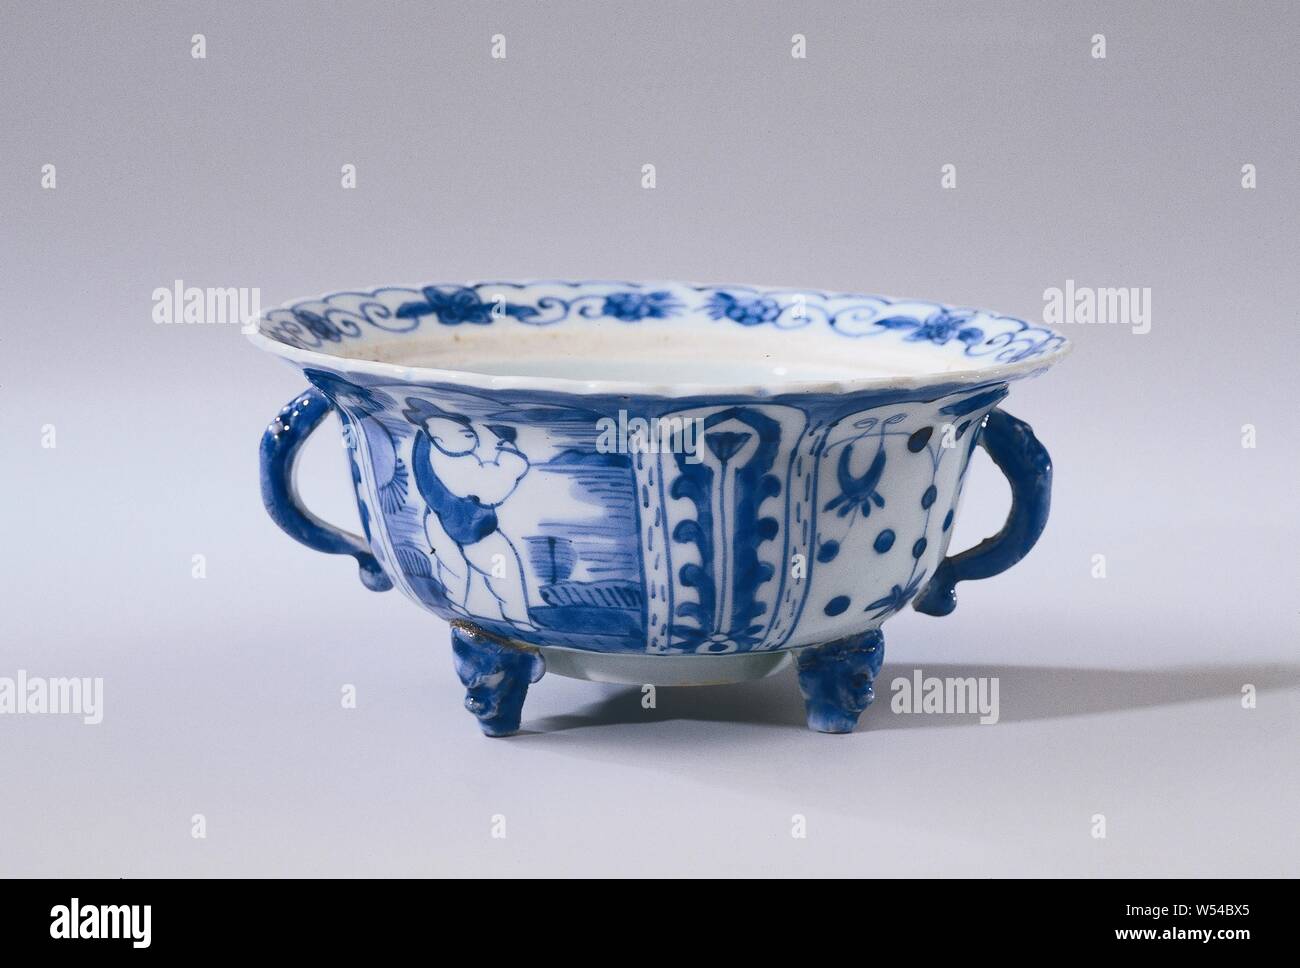 Covered bowl or butter tub with a figure in a landscape, lotus scrolls and flower sprays, Lid bowl or butter dish of porcelain with two ears and on three legs in the form of a monster's head, painted in underglaze blue. The outside of the bowl is divided into wide and narrow compartments, alternately in the wide compartments a stylized person in a landscape and lotus vines, the narrow boxes with a flower branch. A peony branch on the bottom. The lobed border with flower vines. The decoration of the bowl is based on the Chinese kraak porcelain. Two legs have been broken off. Blue White Stock Photo